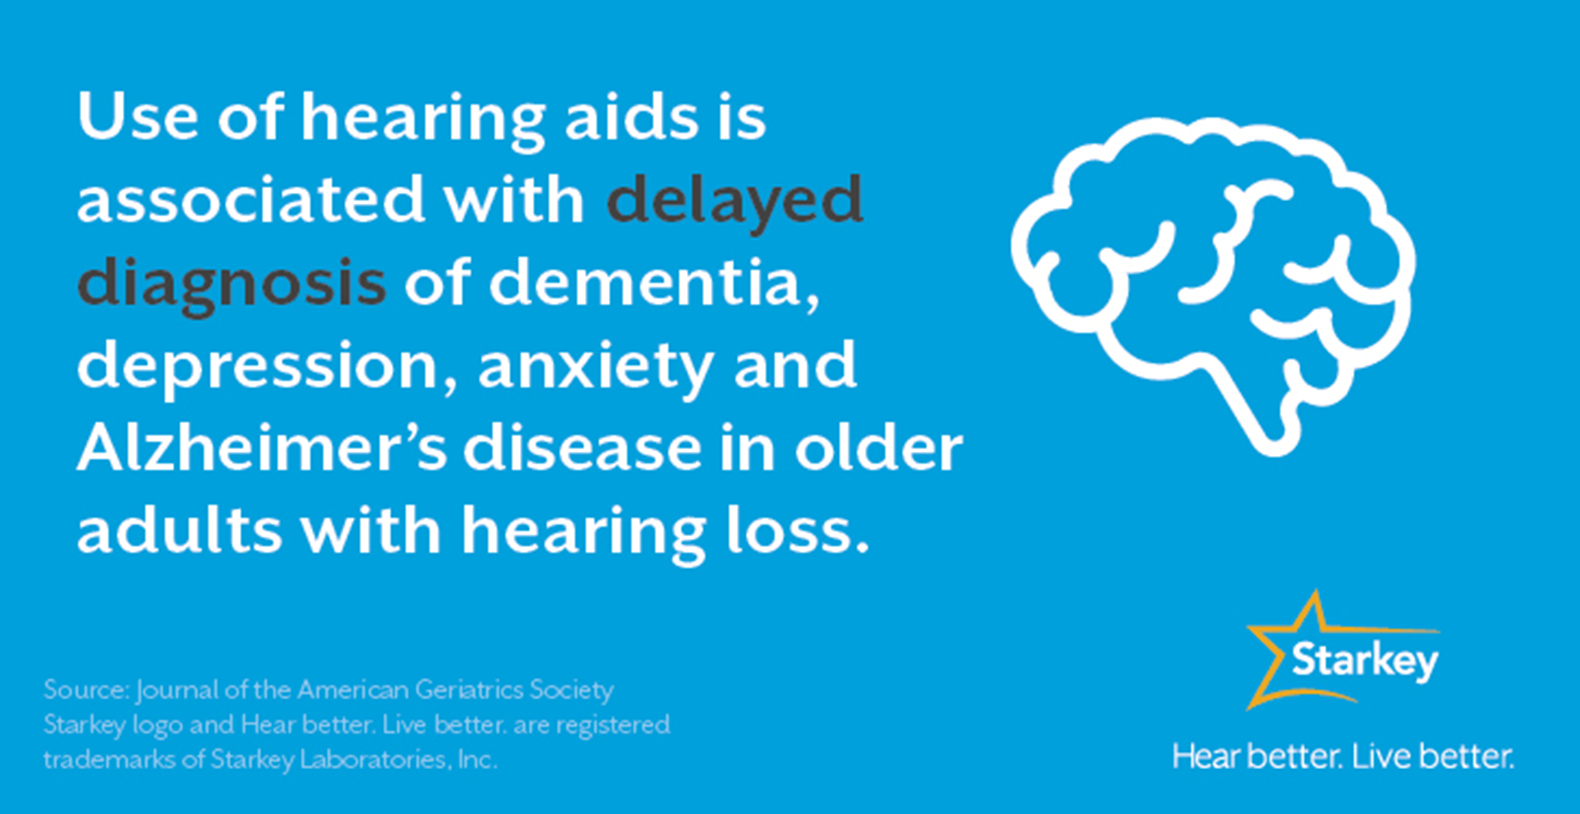 hearing-aids-prevent-negative-health-conditions-bl